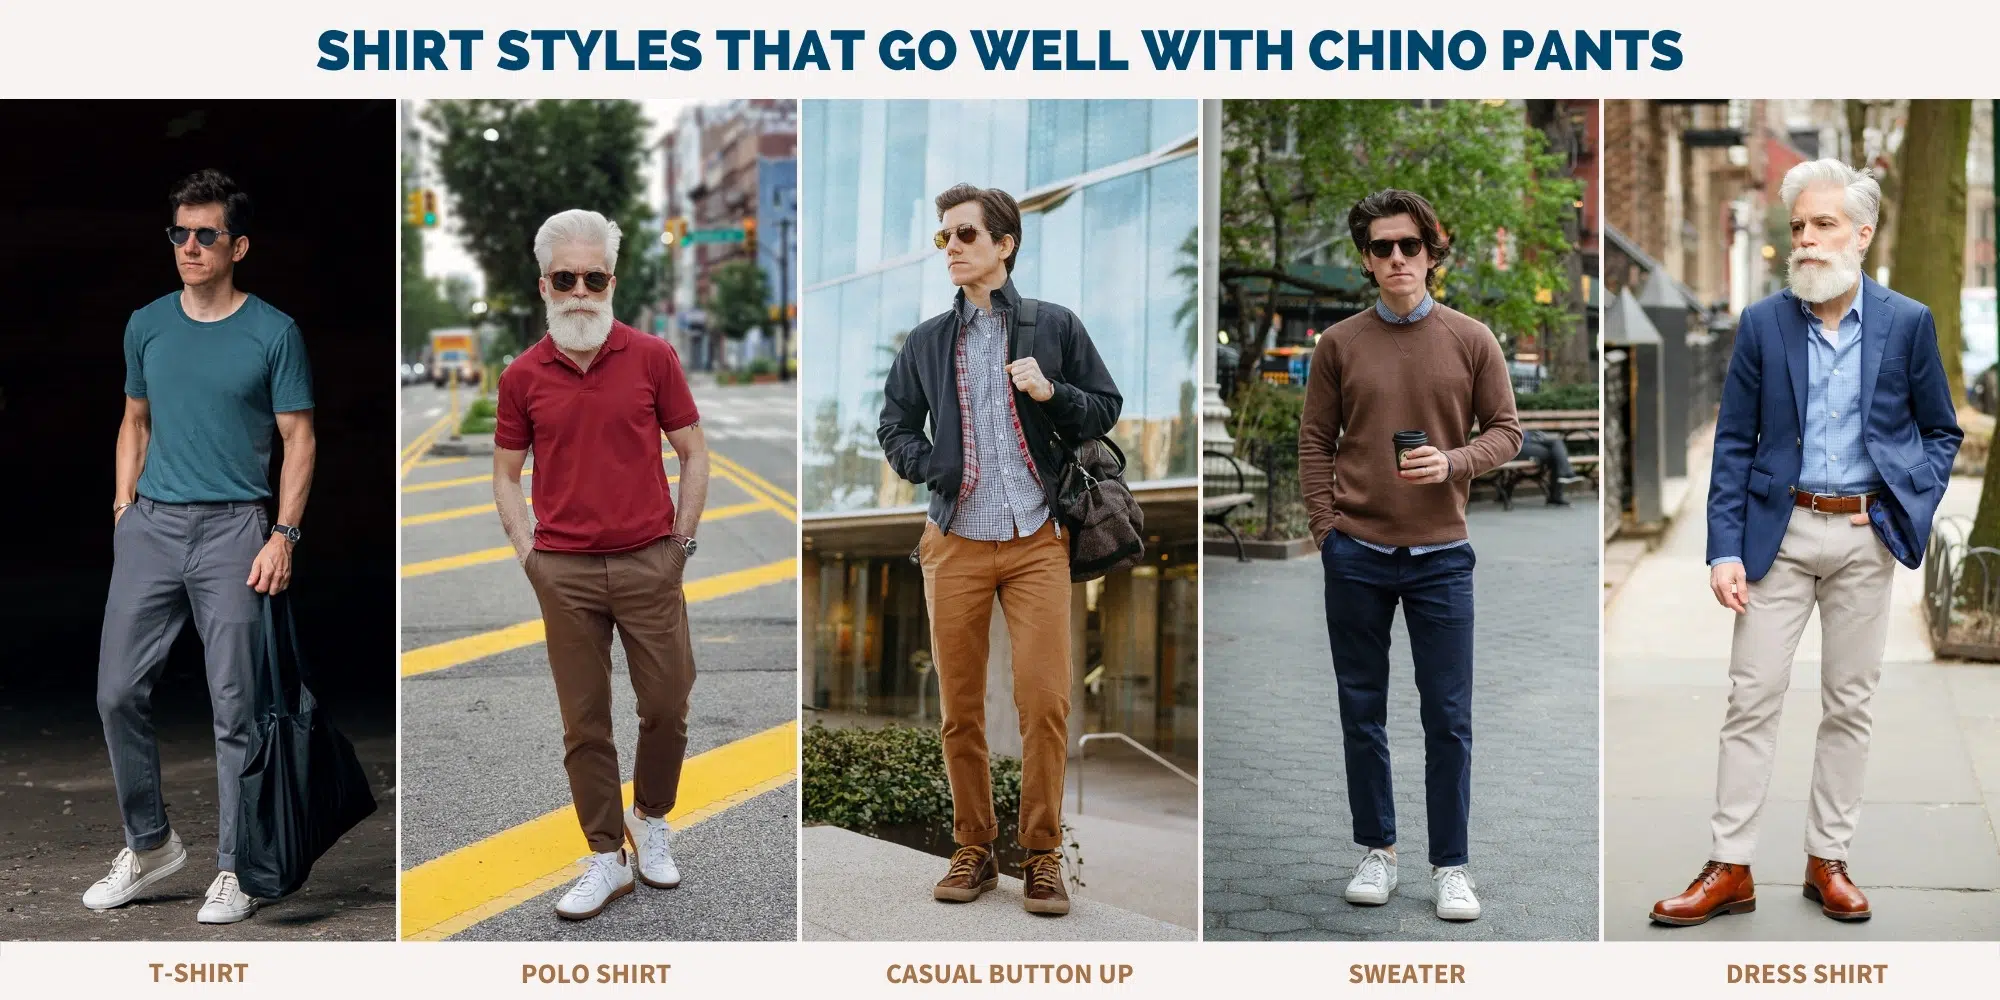 Shirts to wear with chinos